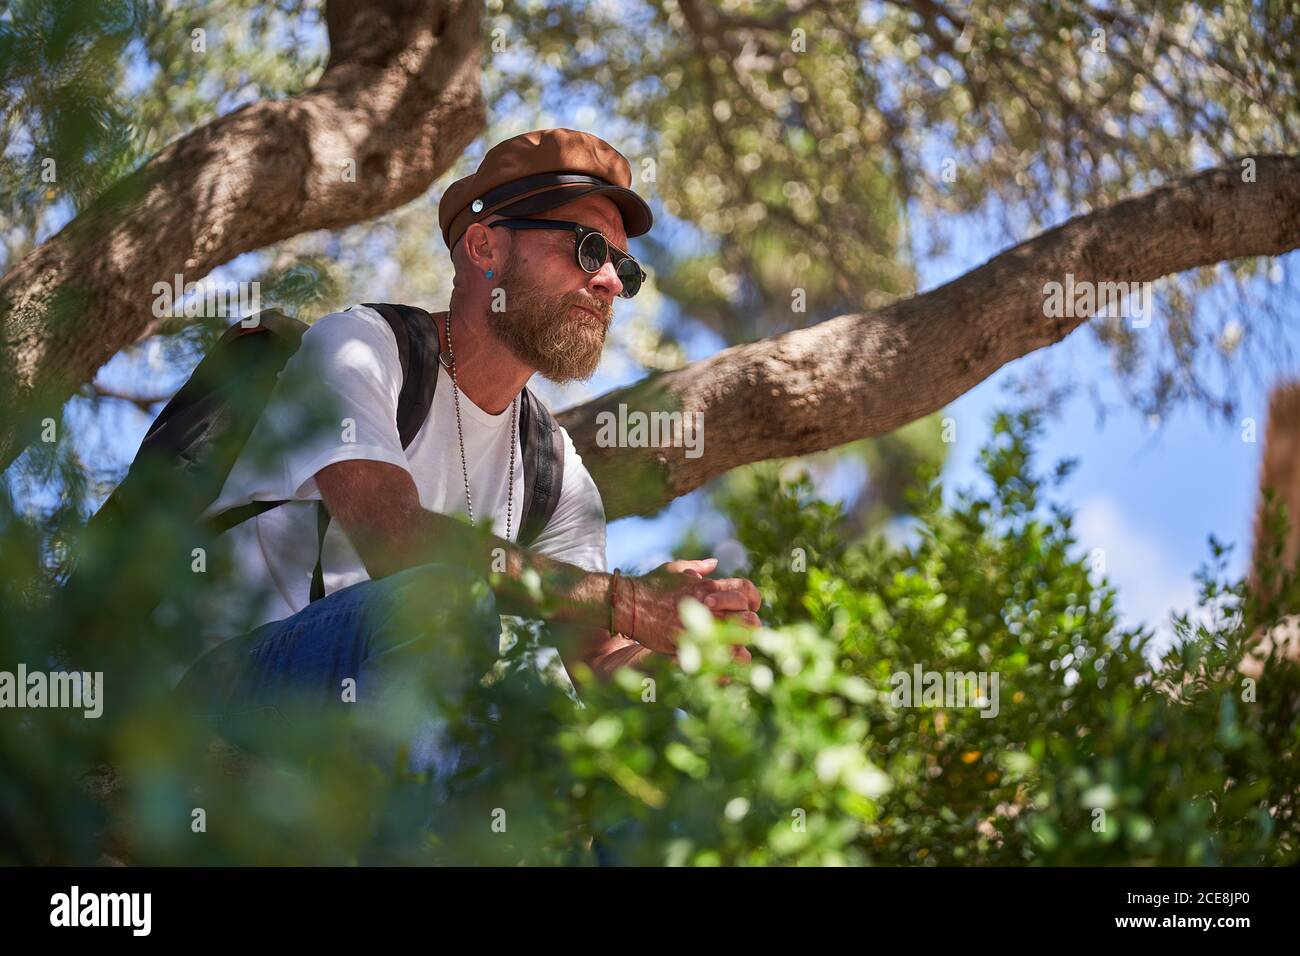 https://c8.alamy.com/comp/2CE8JP0/low-angle-side-view-of-contemplative-adult-hipster-male-traveler-in-cap-and-sunglasses-with-backpack-relaxing-under-tree-branches-during-hiking-in-nature-in-sunny-summer-day-2CE8JP0.jpg